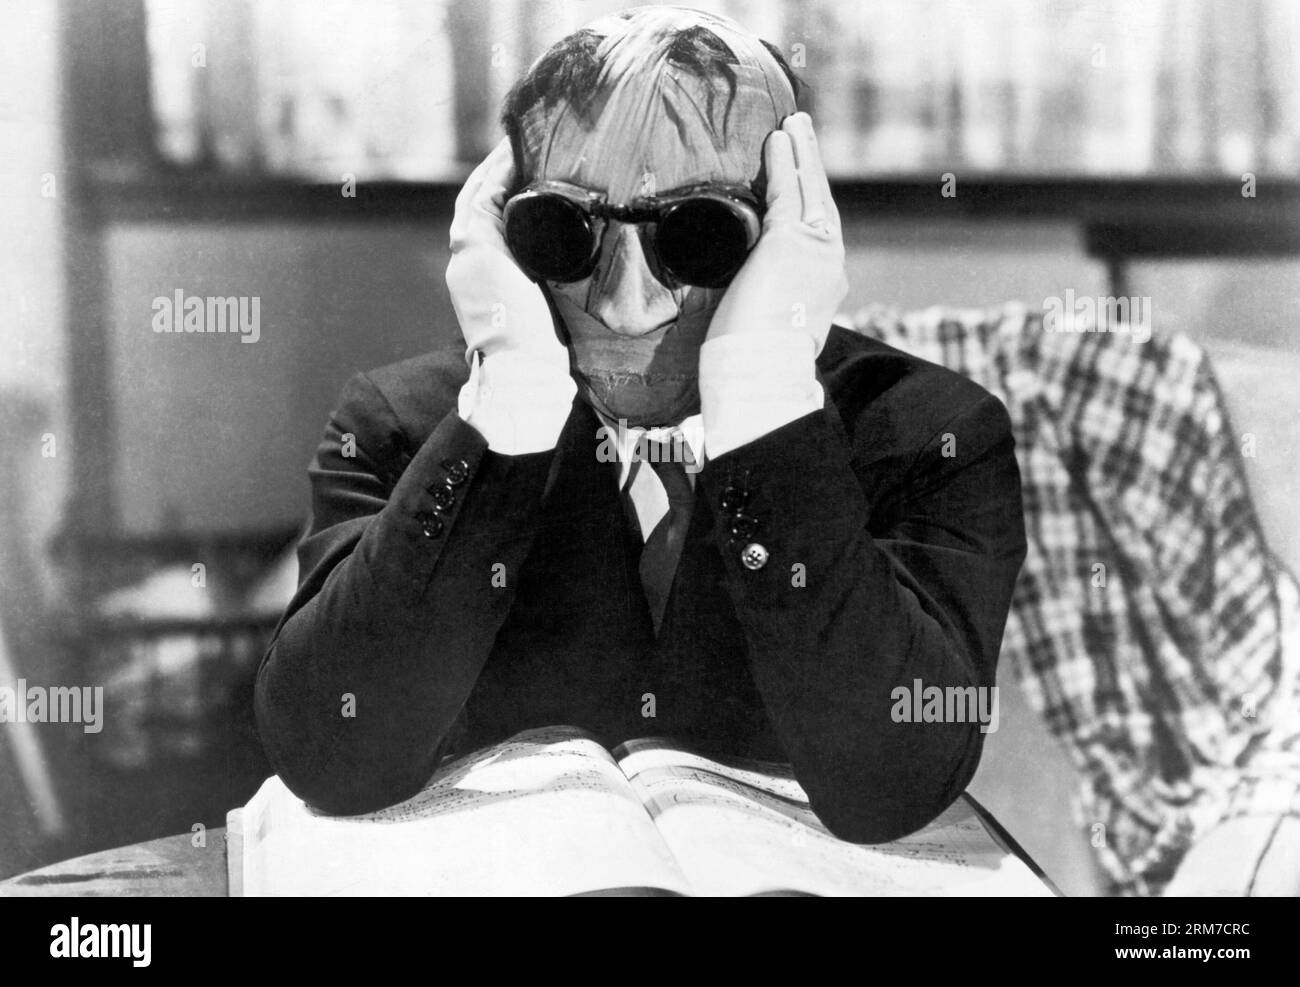 CLAUDE RAINS in THE INVISIBLE MAN (1933), directed by JAMES WHALE. Credit: UNIVERSAL PICTURES / Album Stock Photo